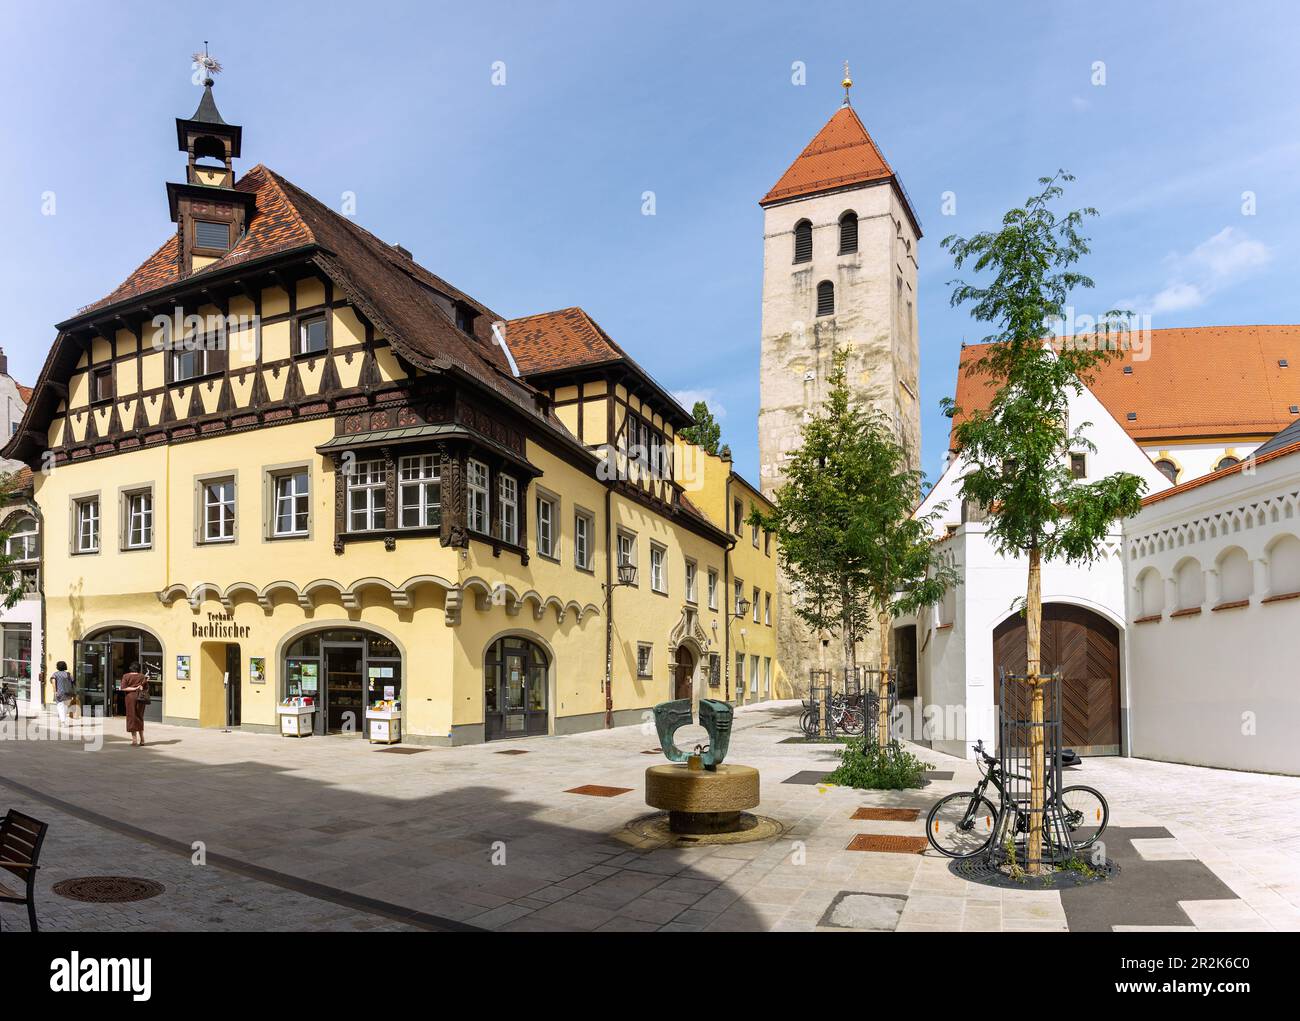 Regensburg; Black Bear Street, Tea House Bachfischer, Old Deanery of the Old Chapel, Campanile of the Collegiate Church of Our Lady of the Old Chapel Stock Photo